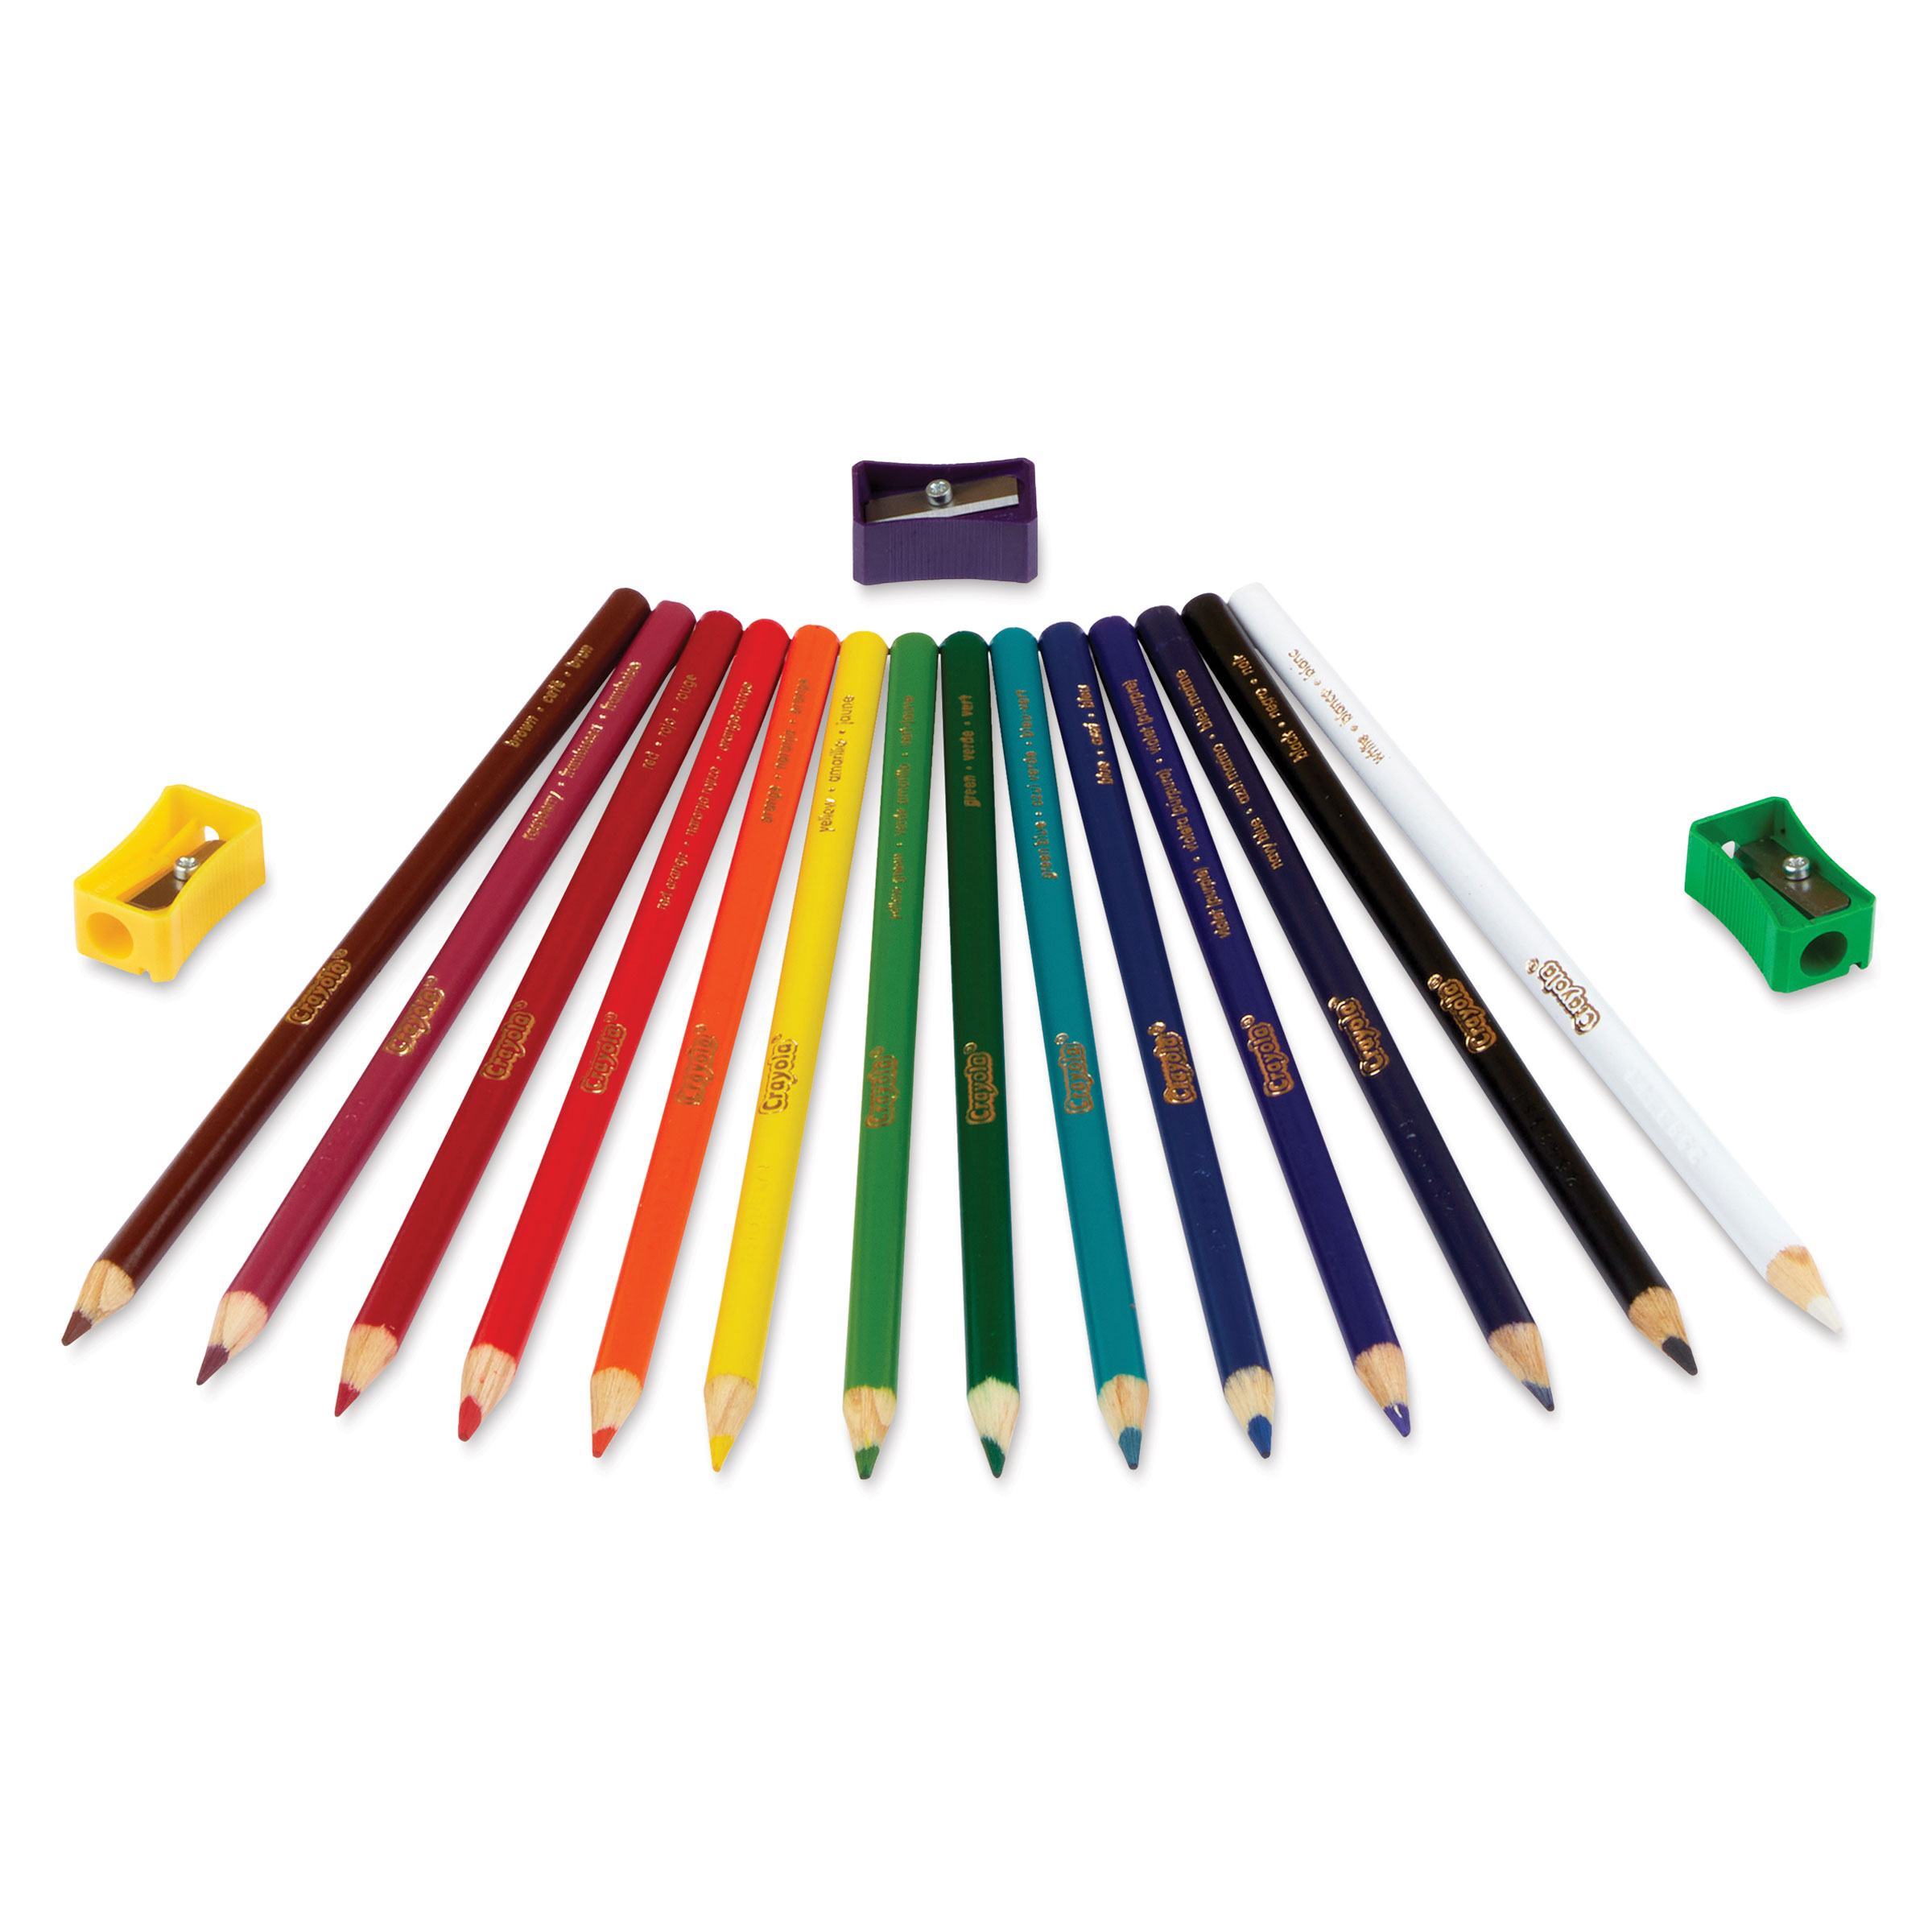 Crayola Colored Pencils - Assorted Colors, Set of 36